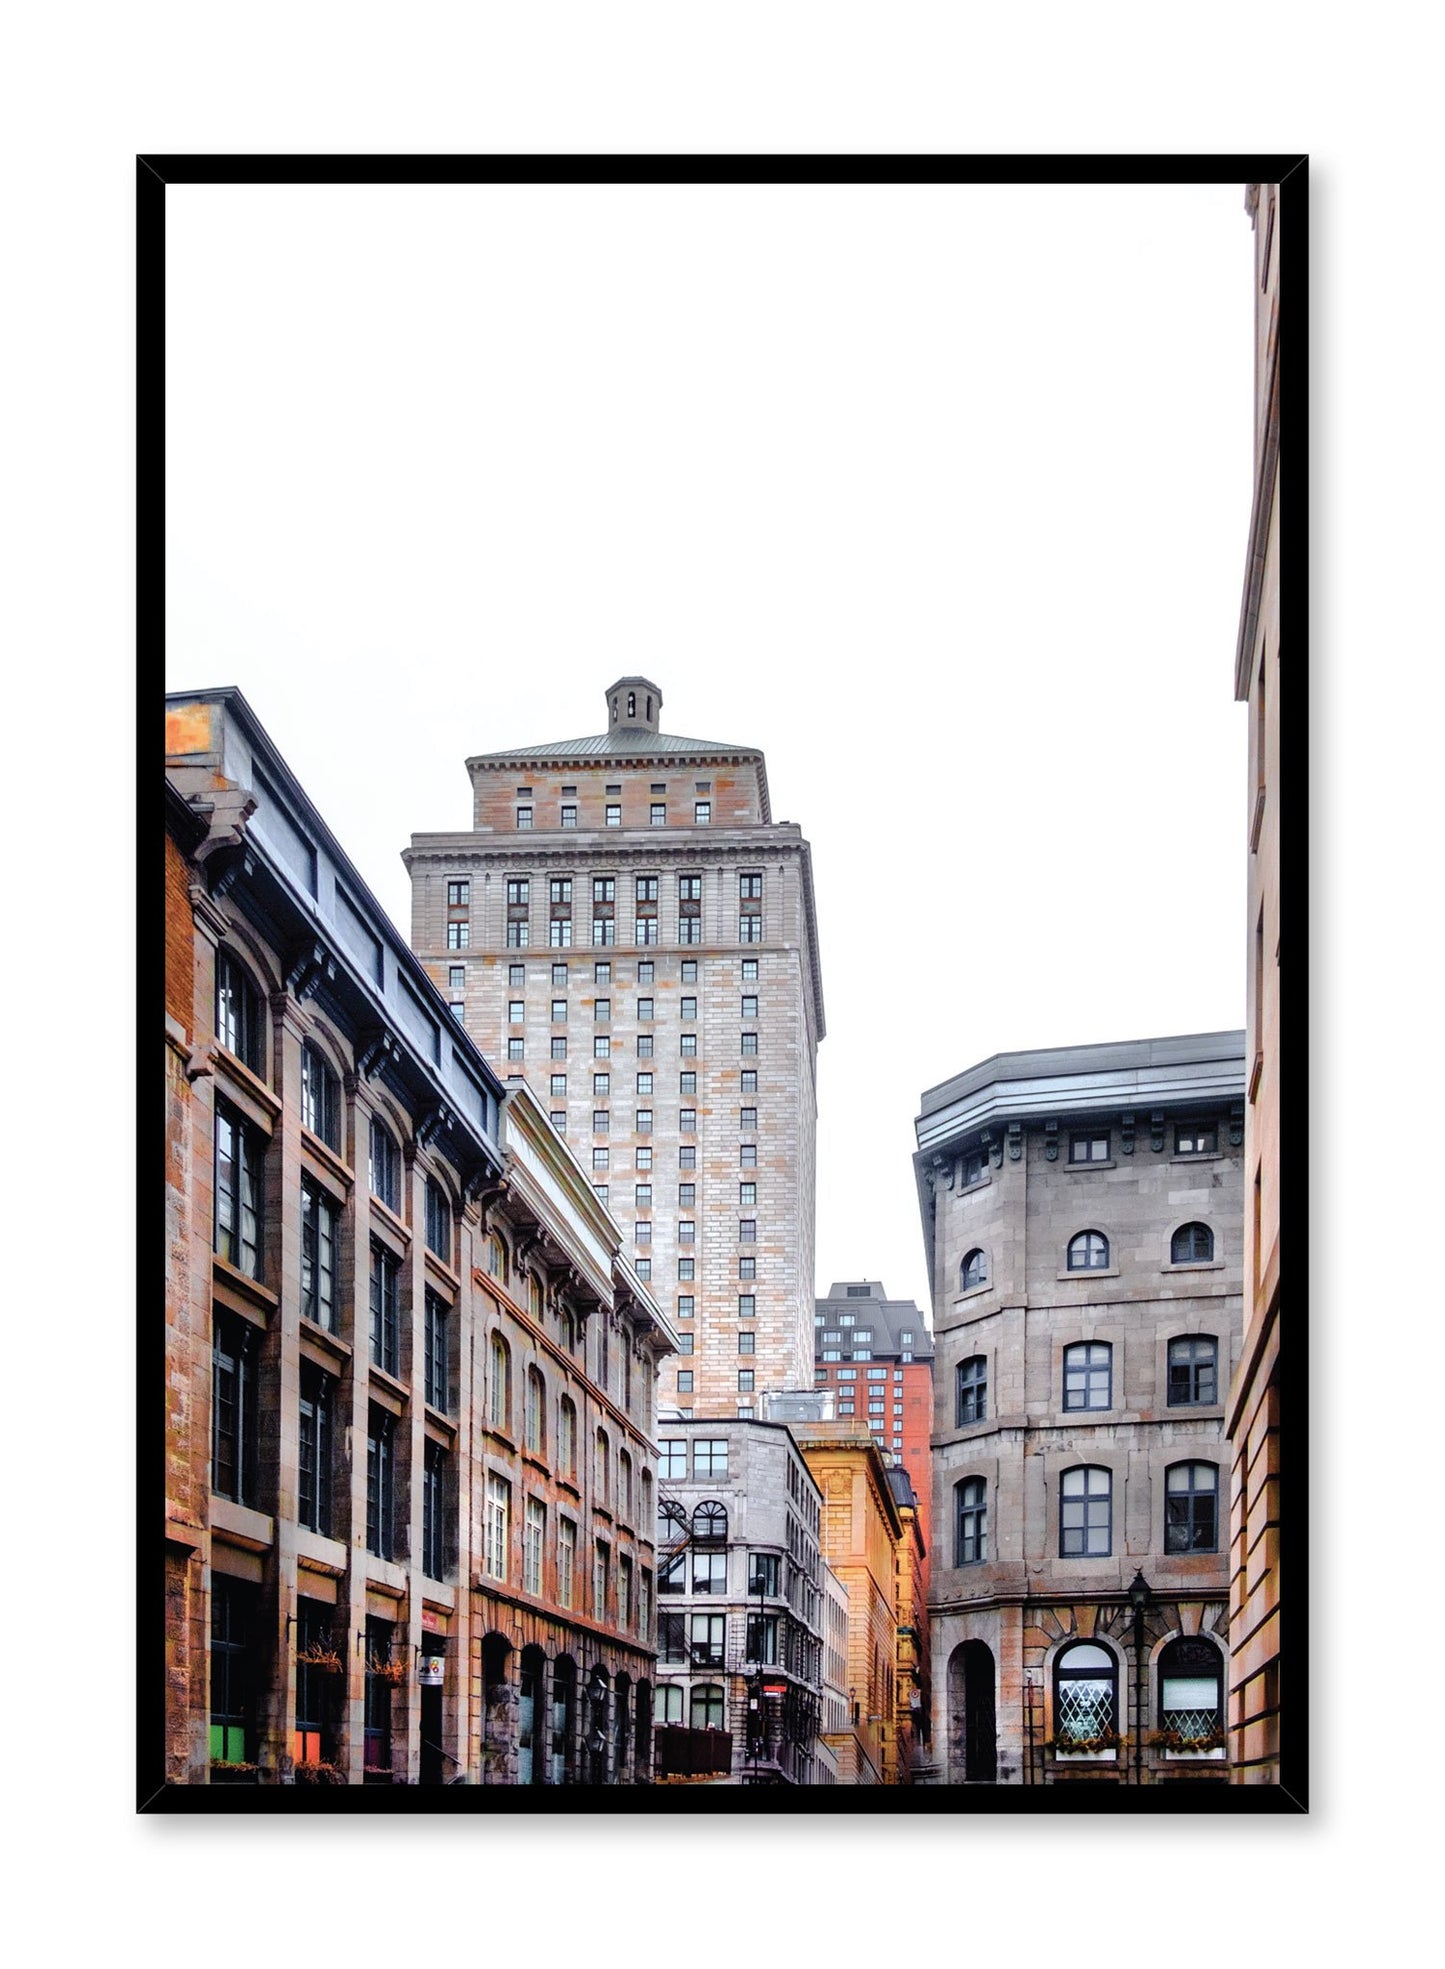 Minimalist design poster by Opposite Wall with urban city photography of Old Port Montreal